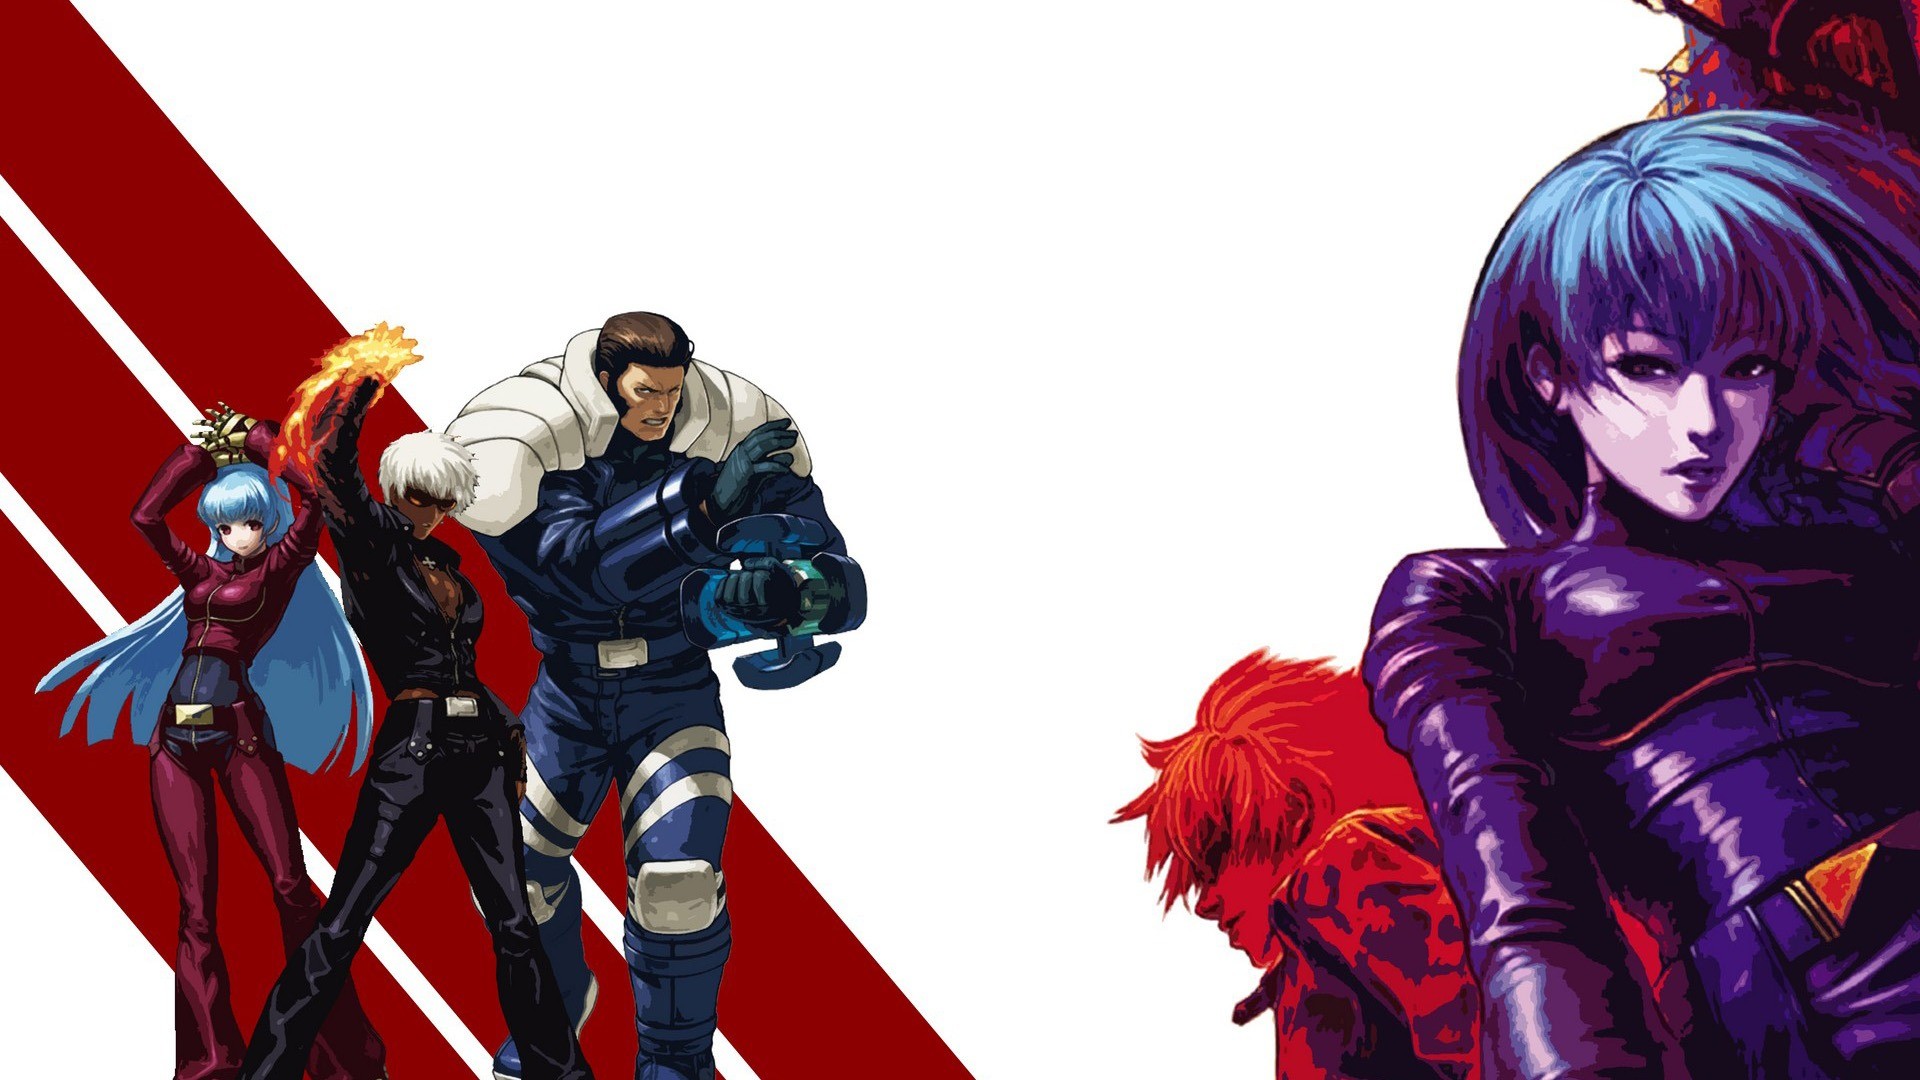 1920x1080 The King of Fighters XIII wallpapers #5 - .